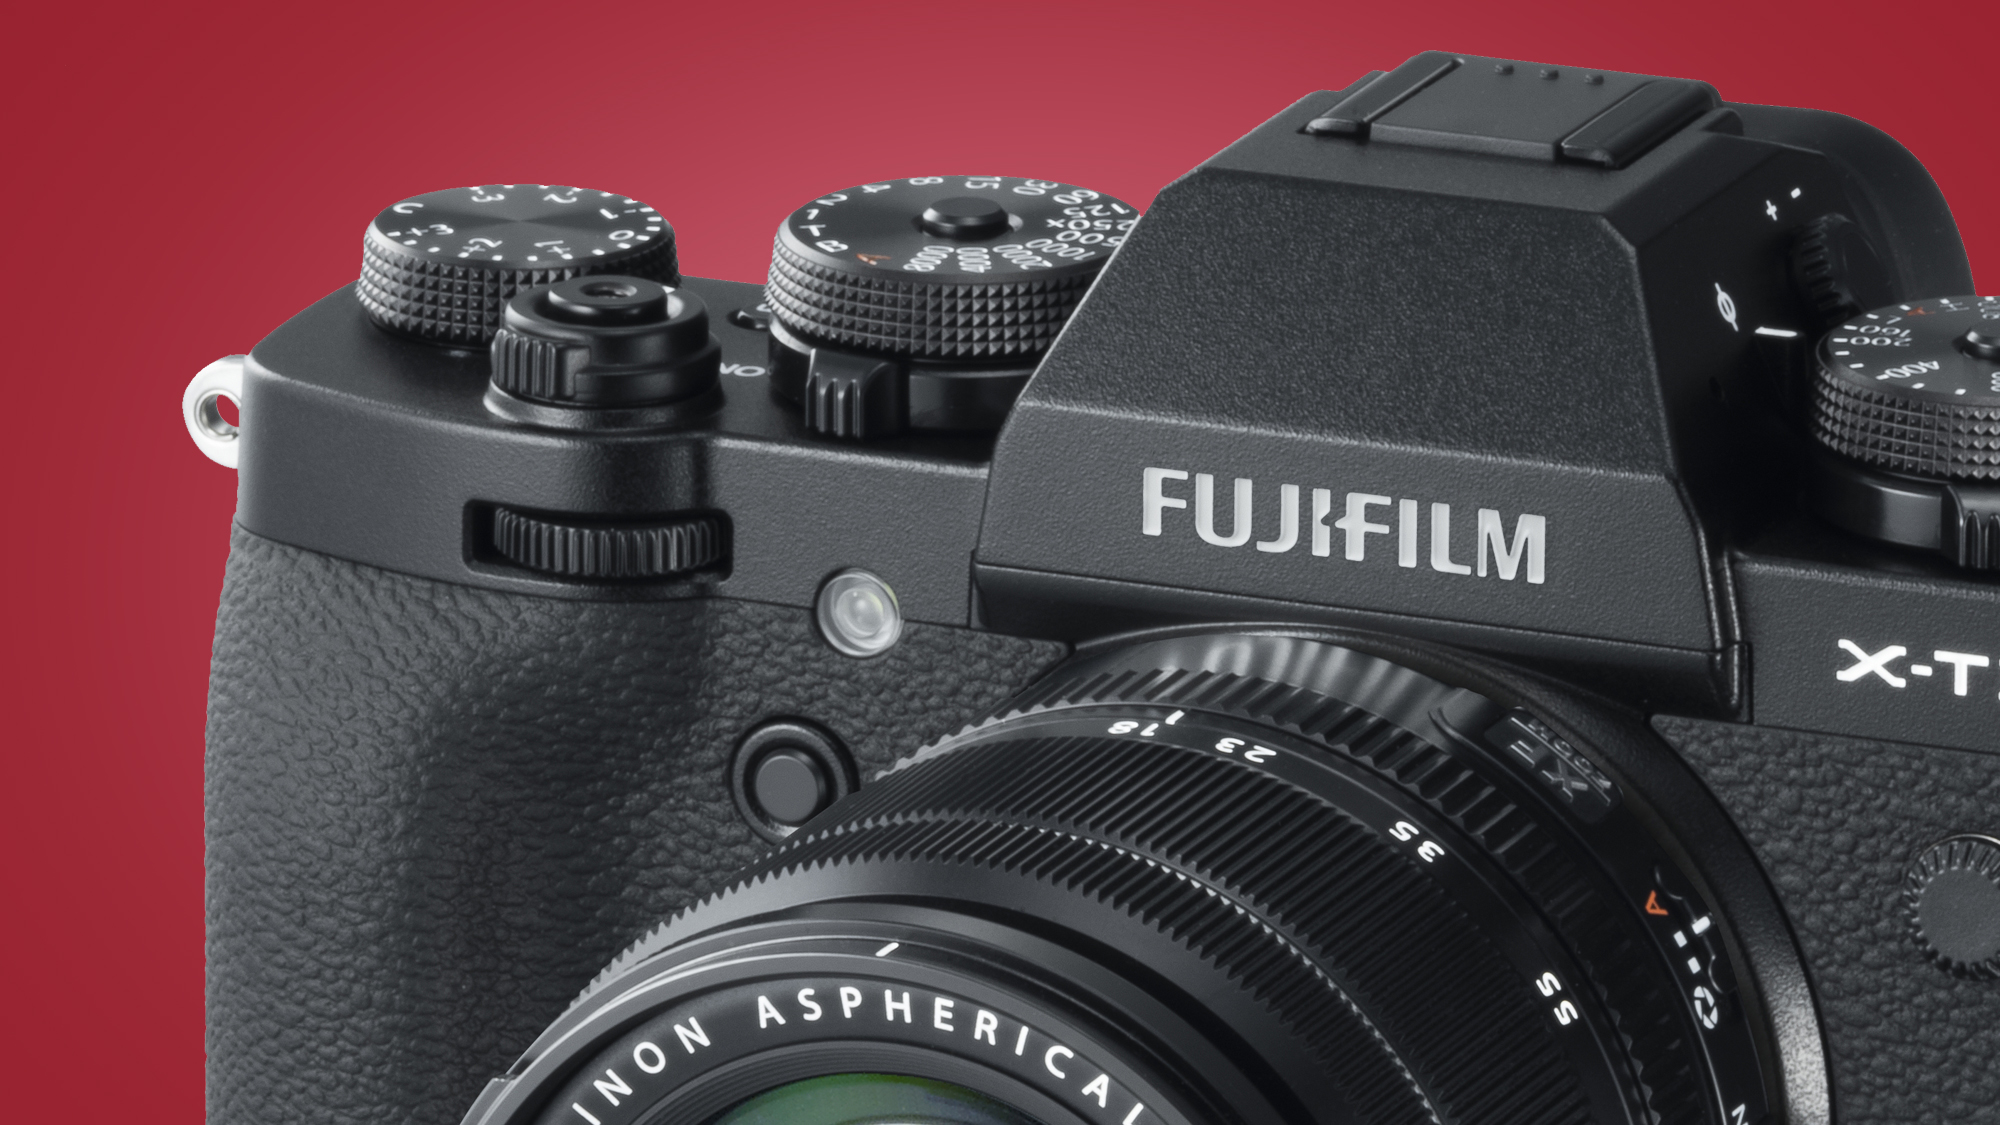 Fujifilm XT4 leaked images give us our first look at the